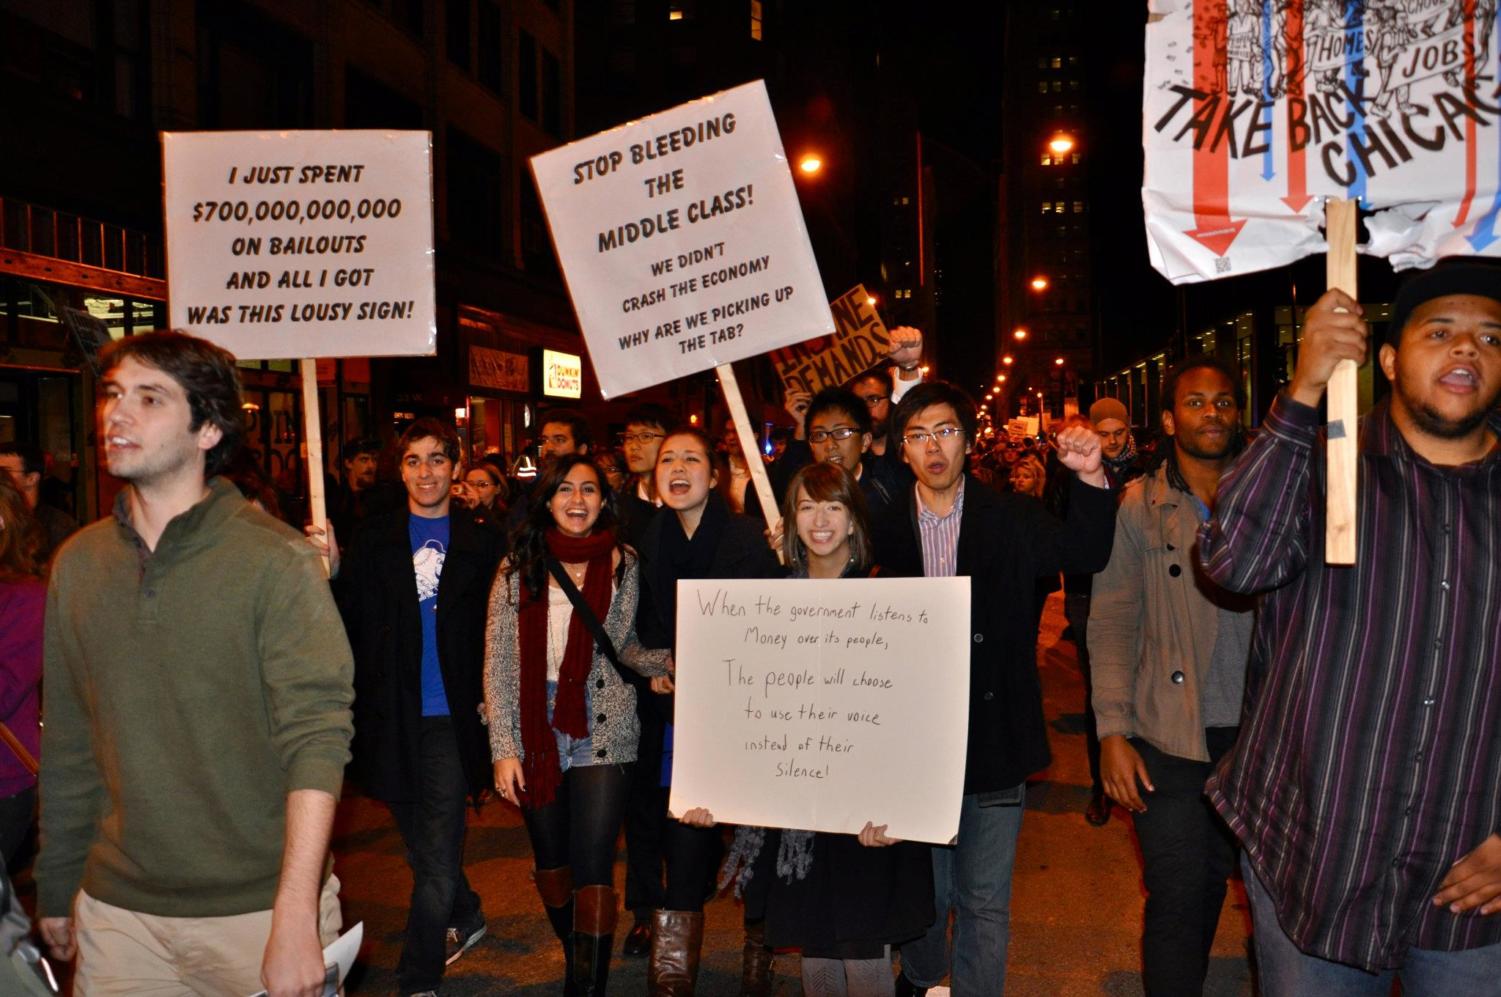 A group of University of Chicago students join in the Occupy Chicago demonstrations and march down Jackson Street toward Grant Park Saturday evening.